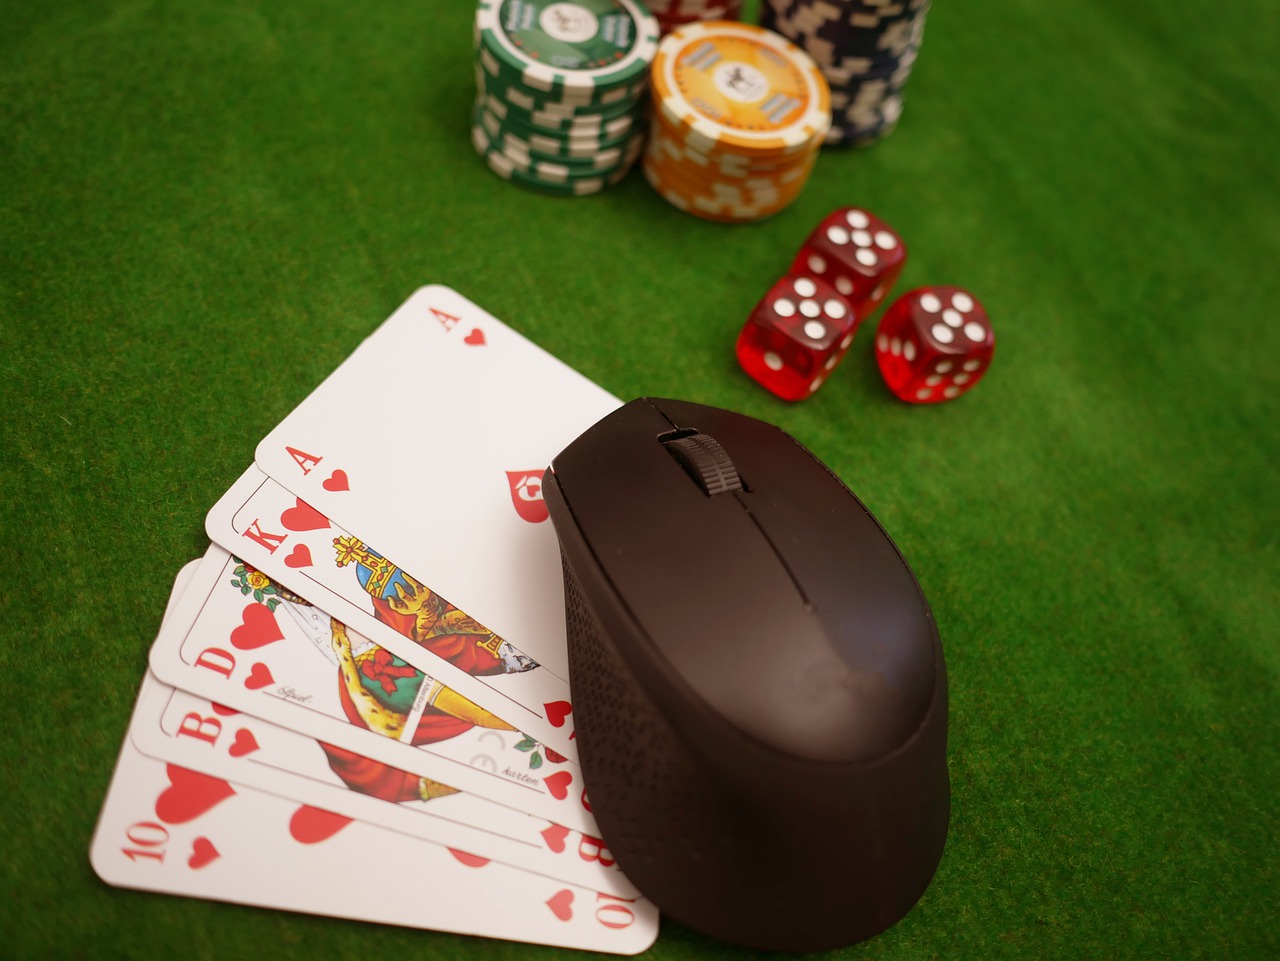 How To Be In The Top 10 With Online Casinos